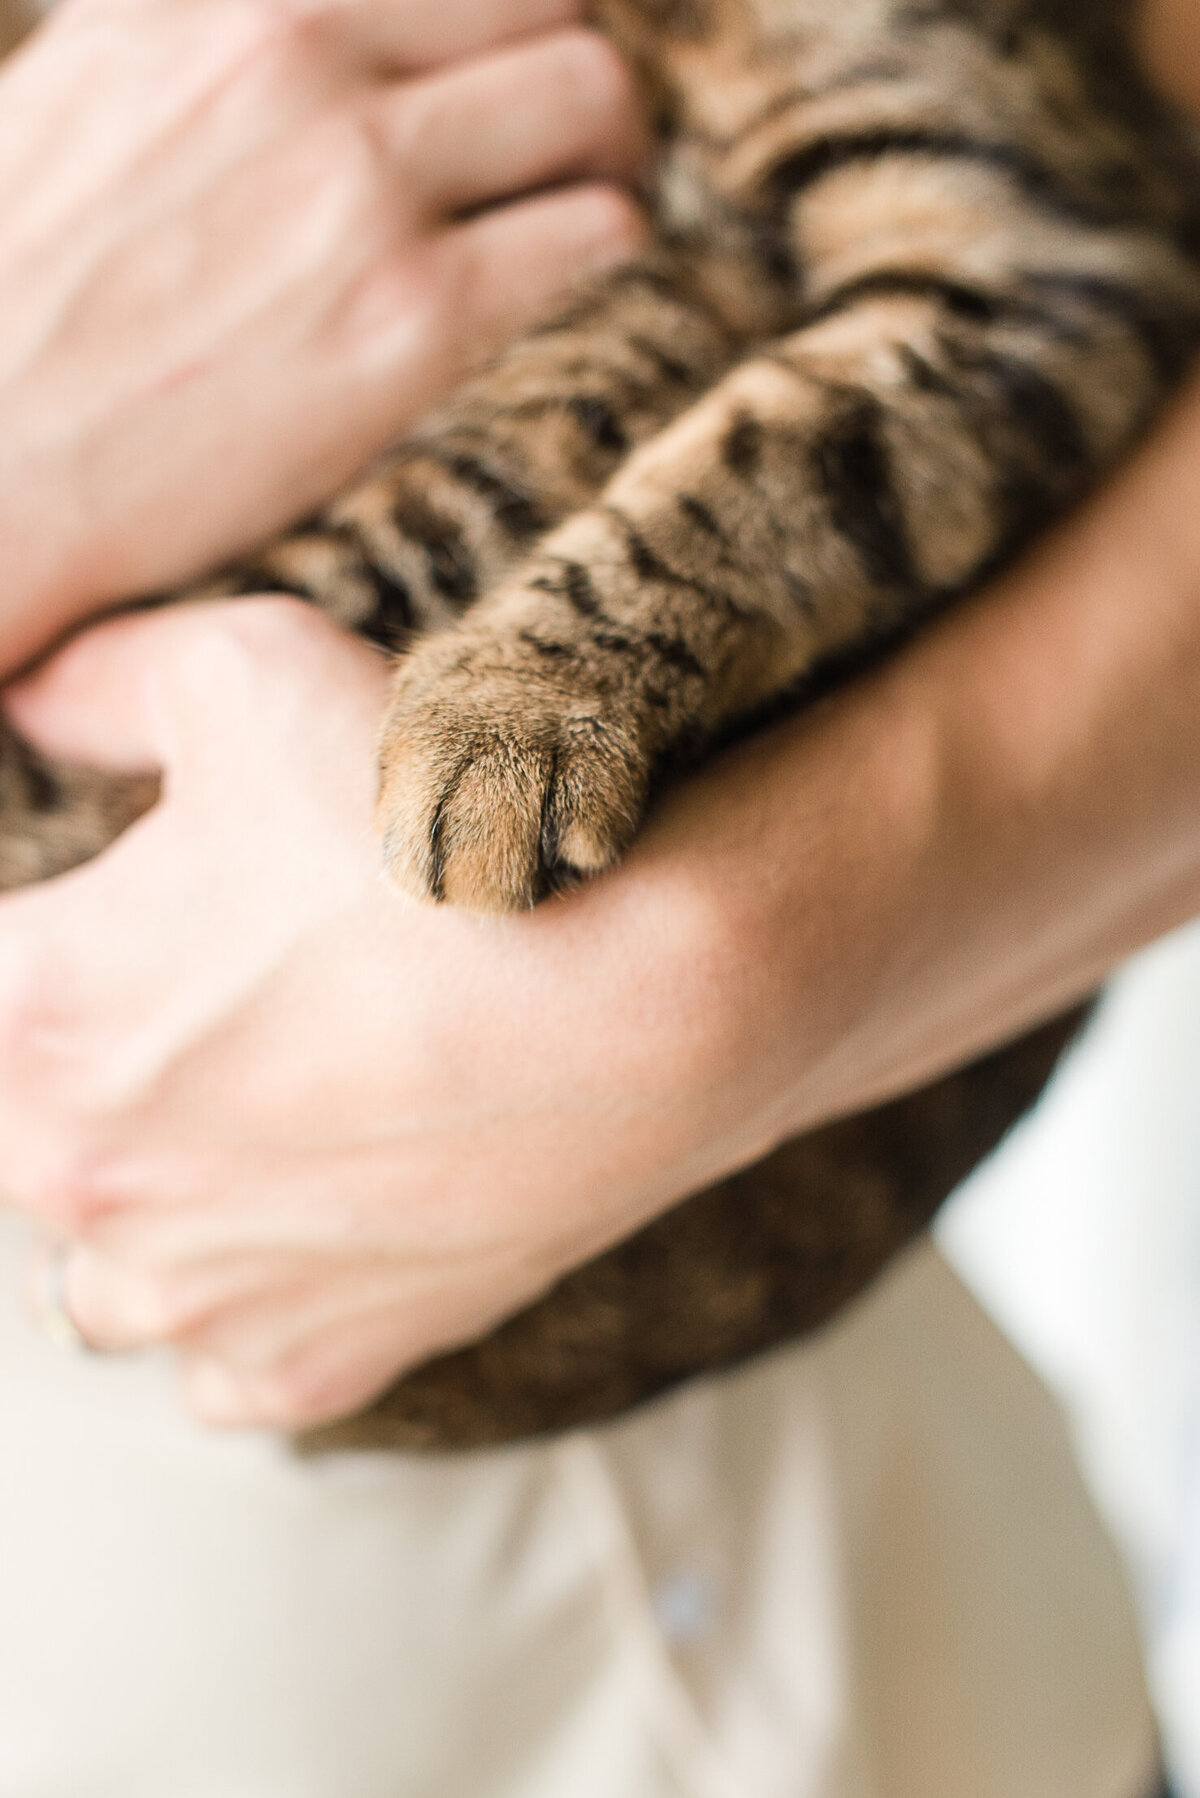 close up of cat paw on human hand